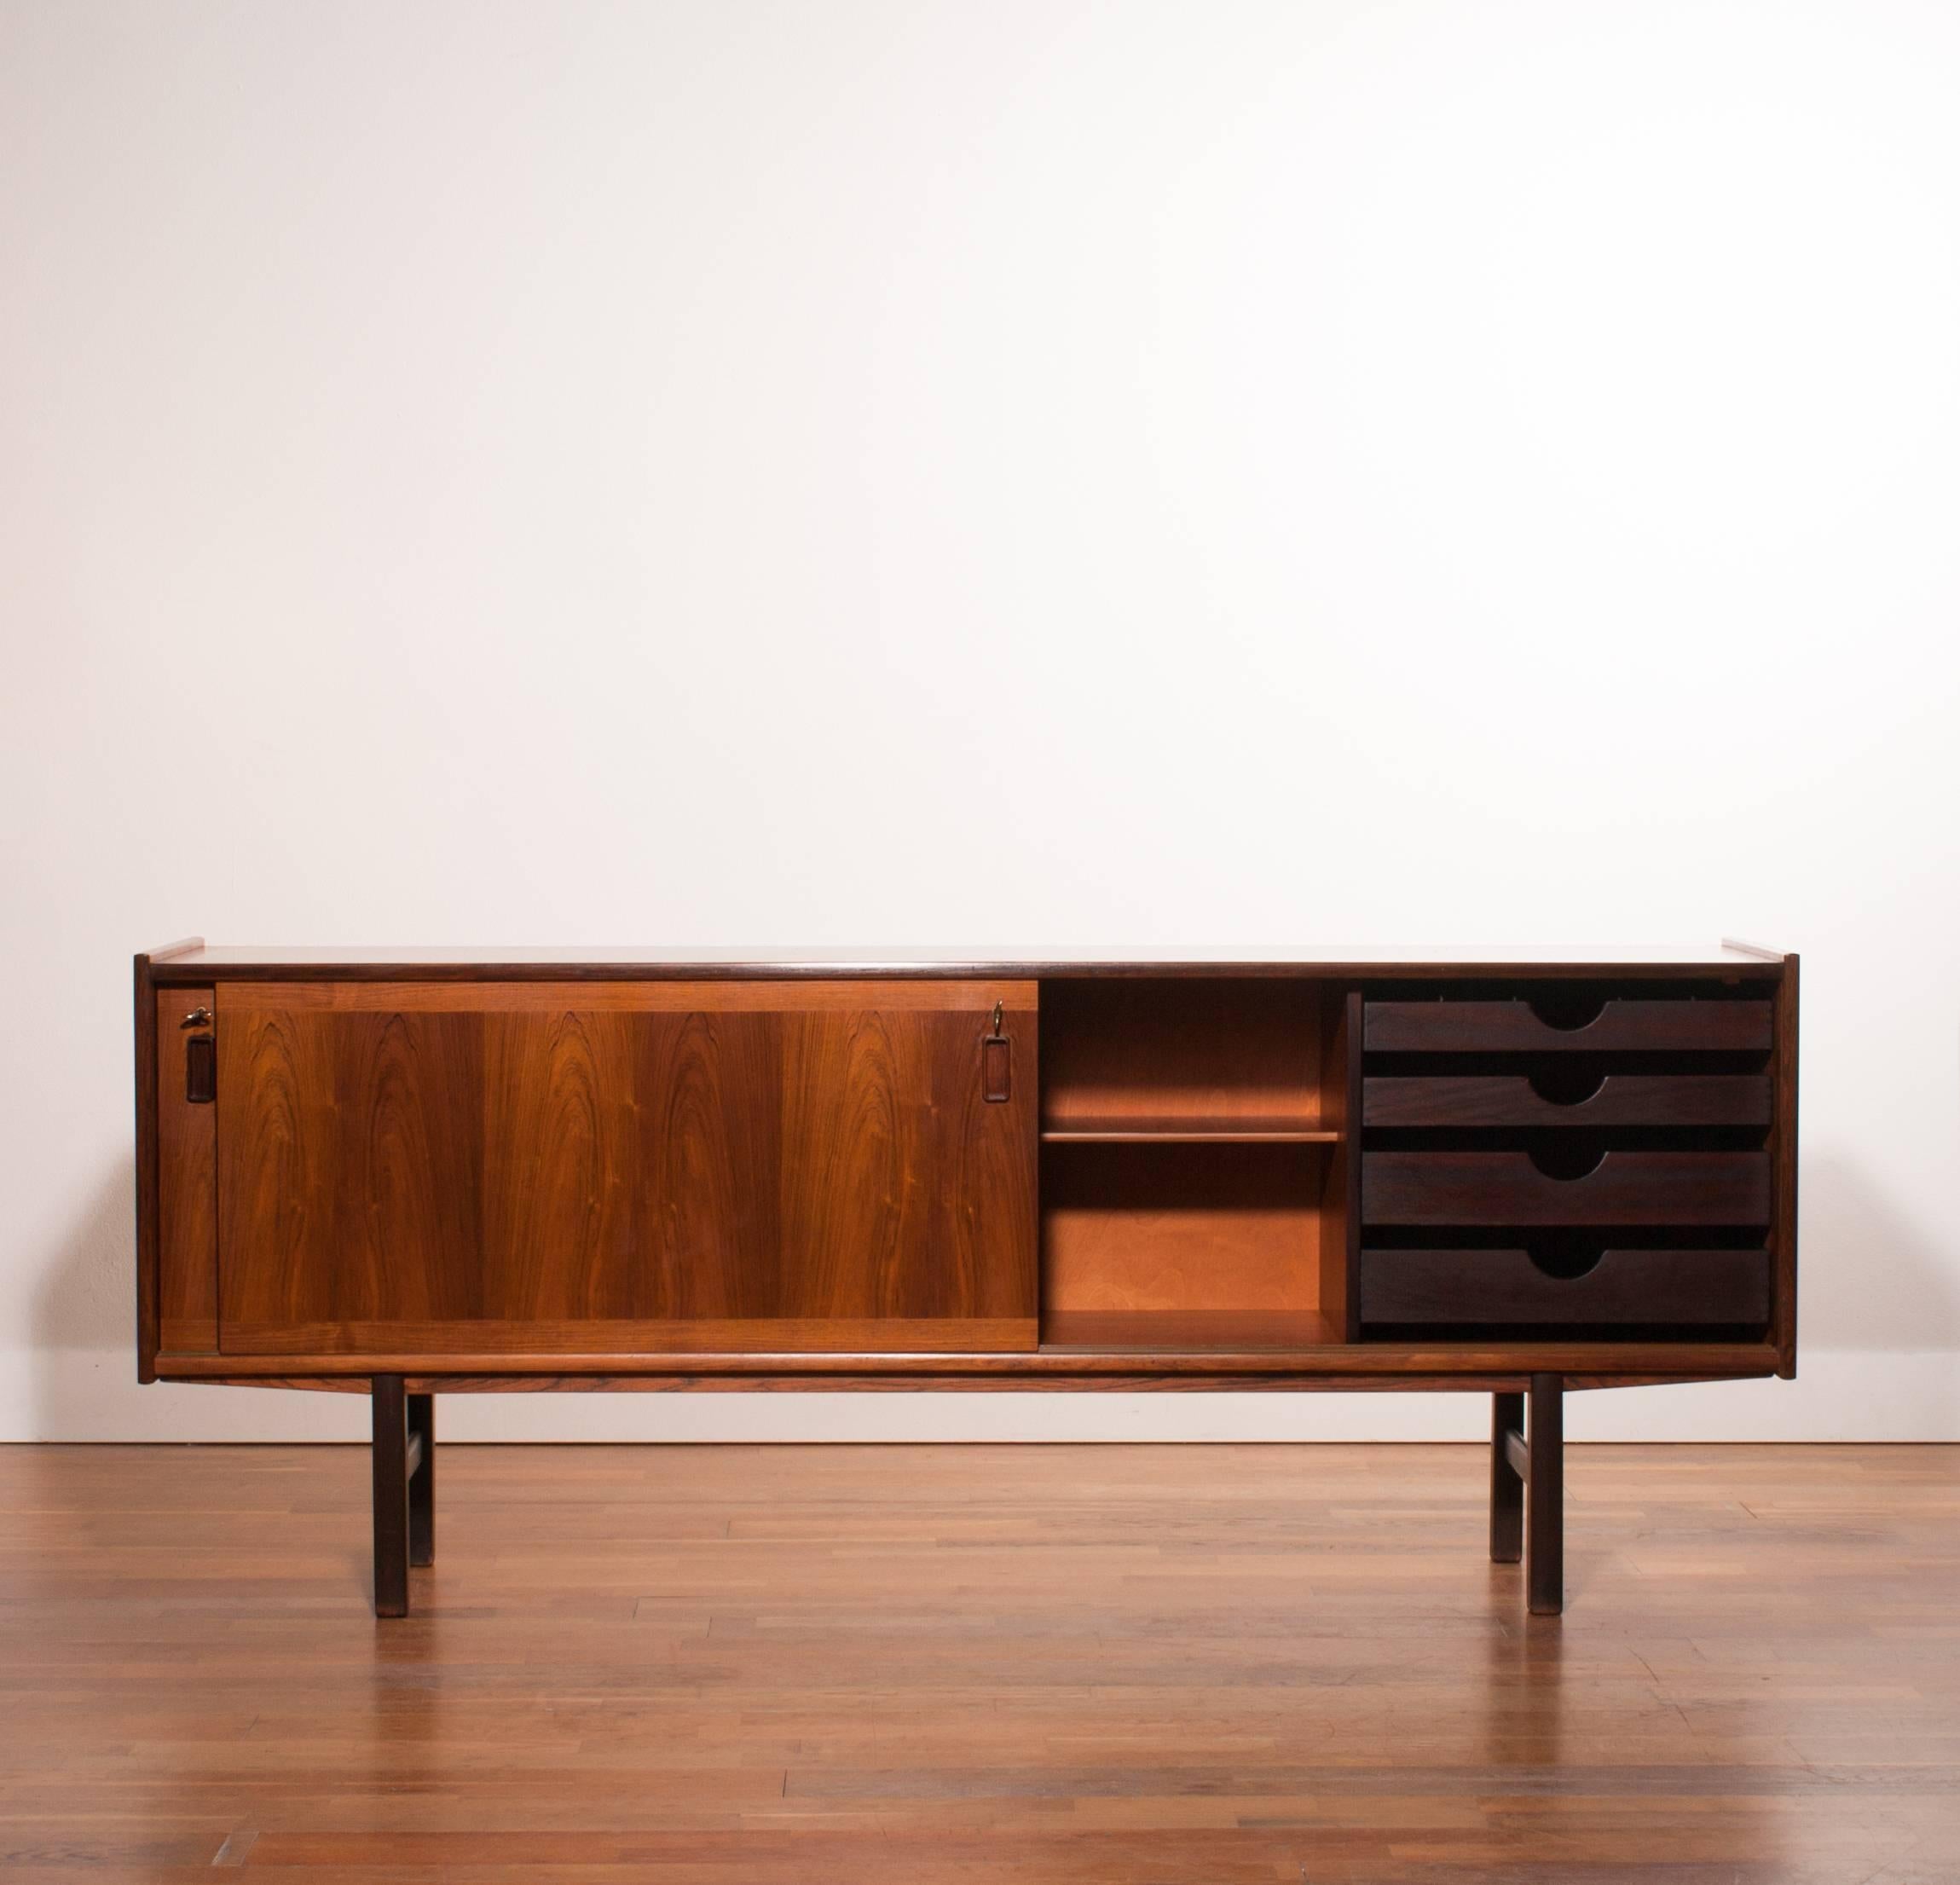 Beautiful sideboard in “Rio Palissander” rosewood veneer.
Two sliding doors and behind one of the sliding doors there are four drawers.
Original keys are included.
This sideboard is in excellent condition. CITES include!
Designed by Gunni